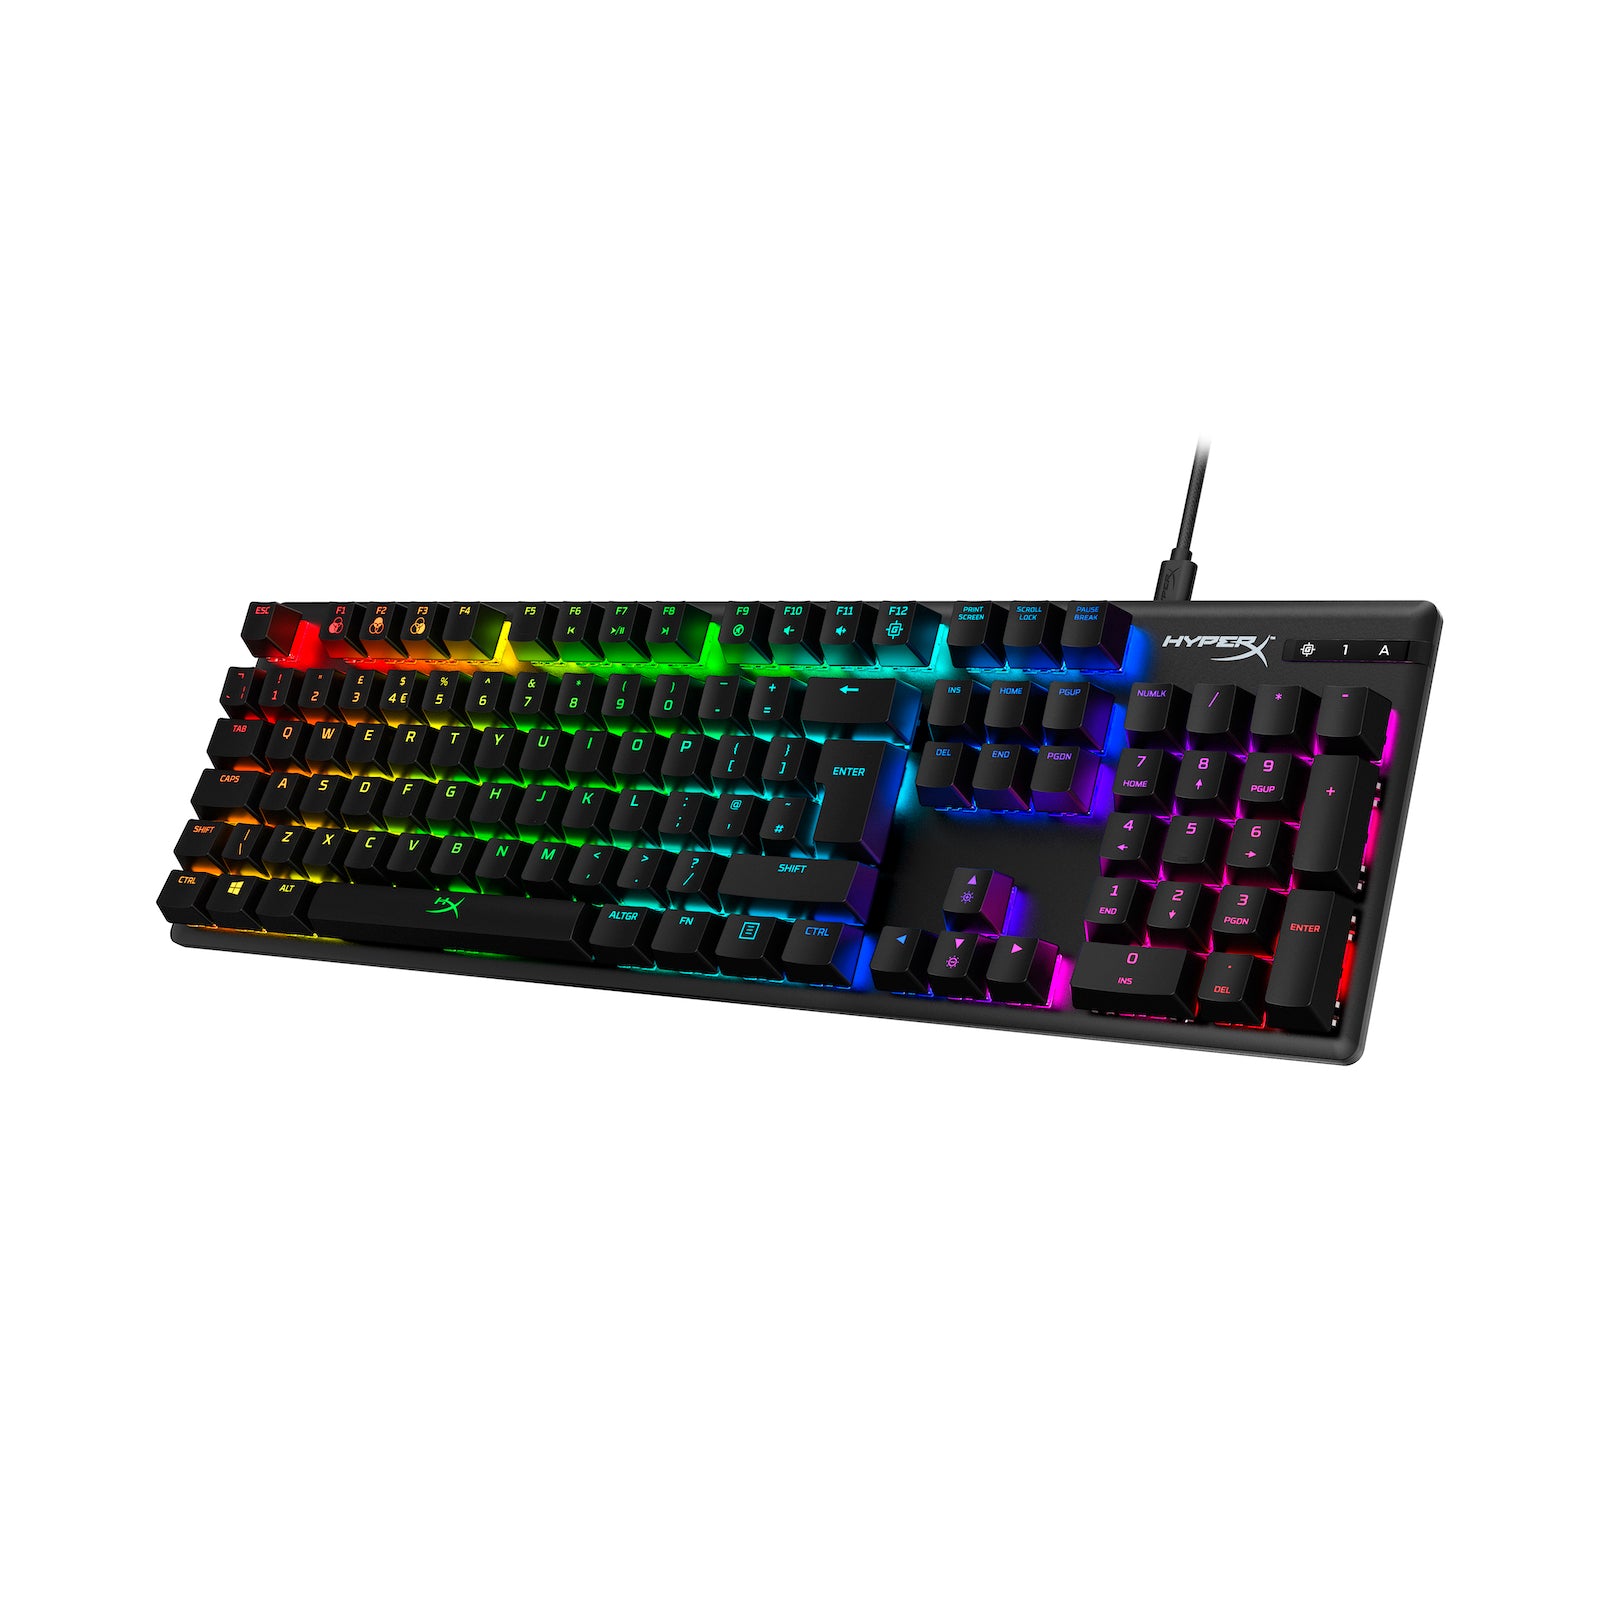 Right front facing view of HyperX Alloy Origins mechanical keyboard displaying RGB lighting